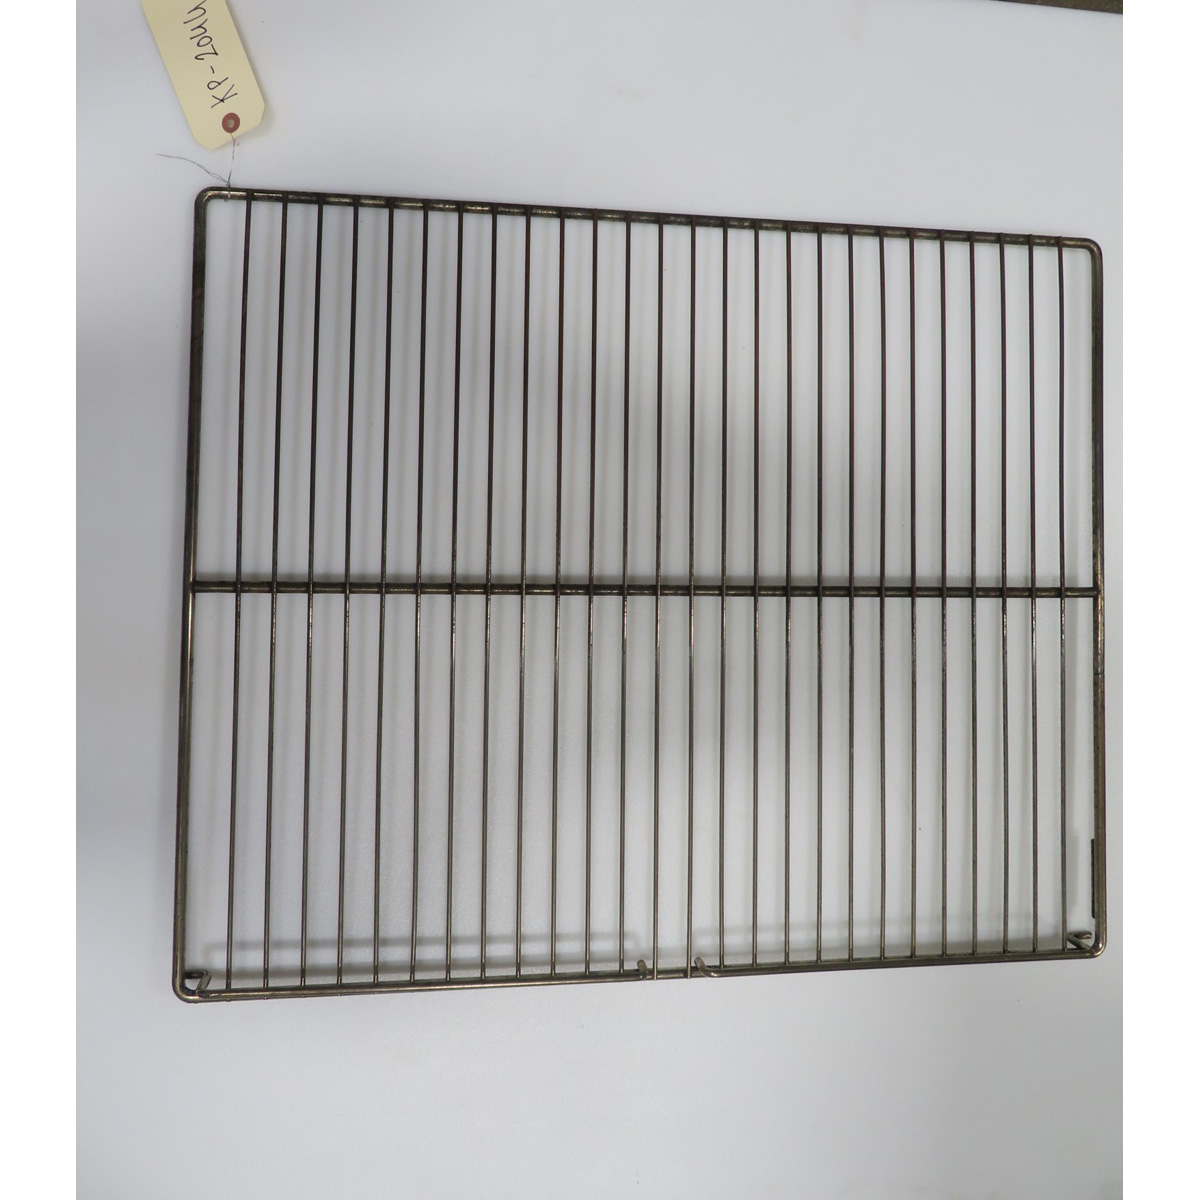 Duke 153230 Oven Rack, Standard, Used Excellent Condition